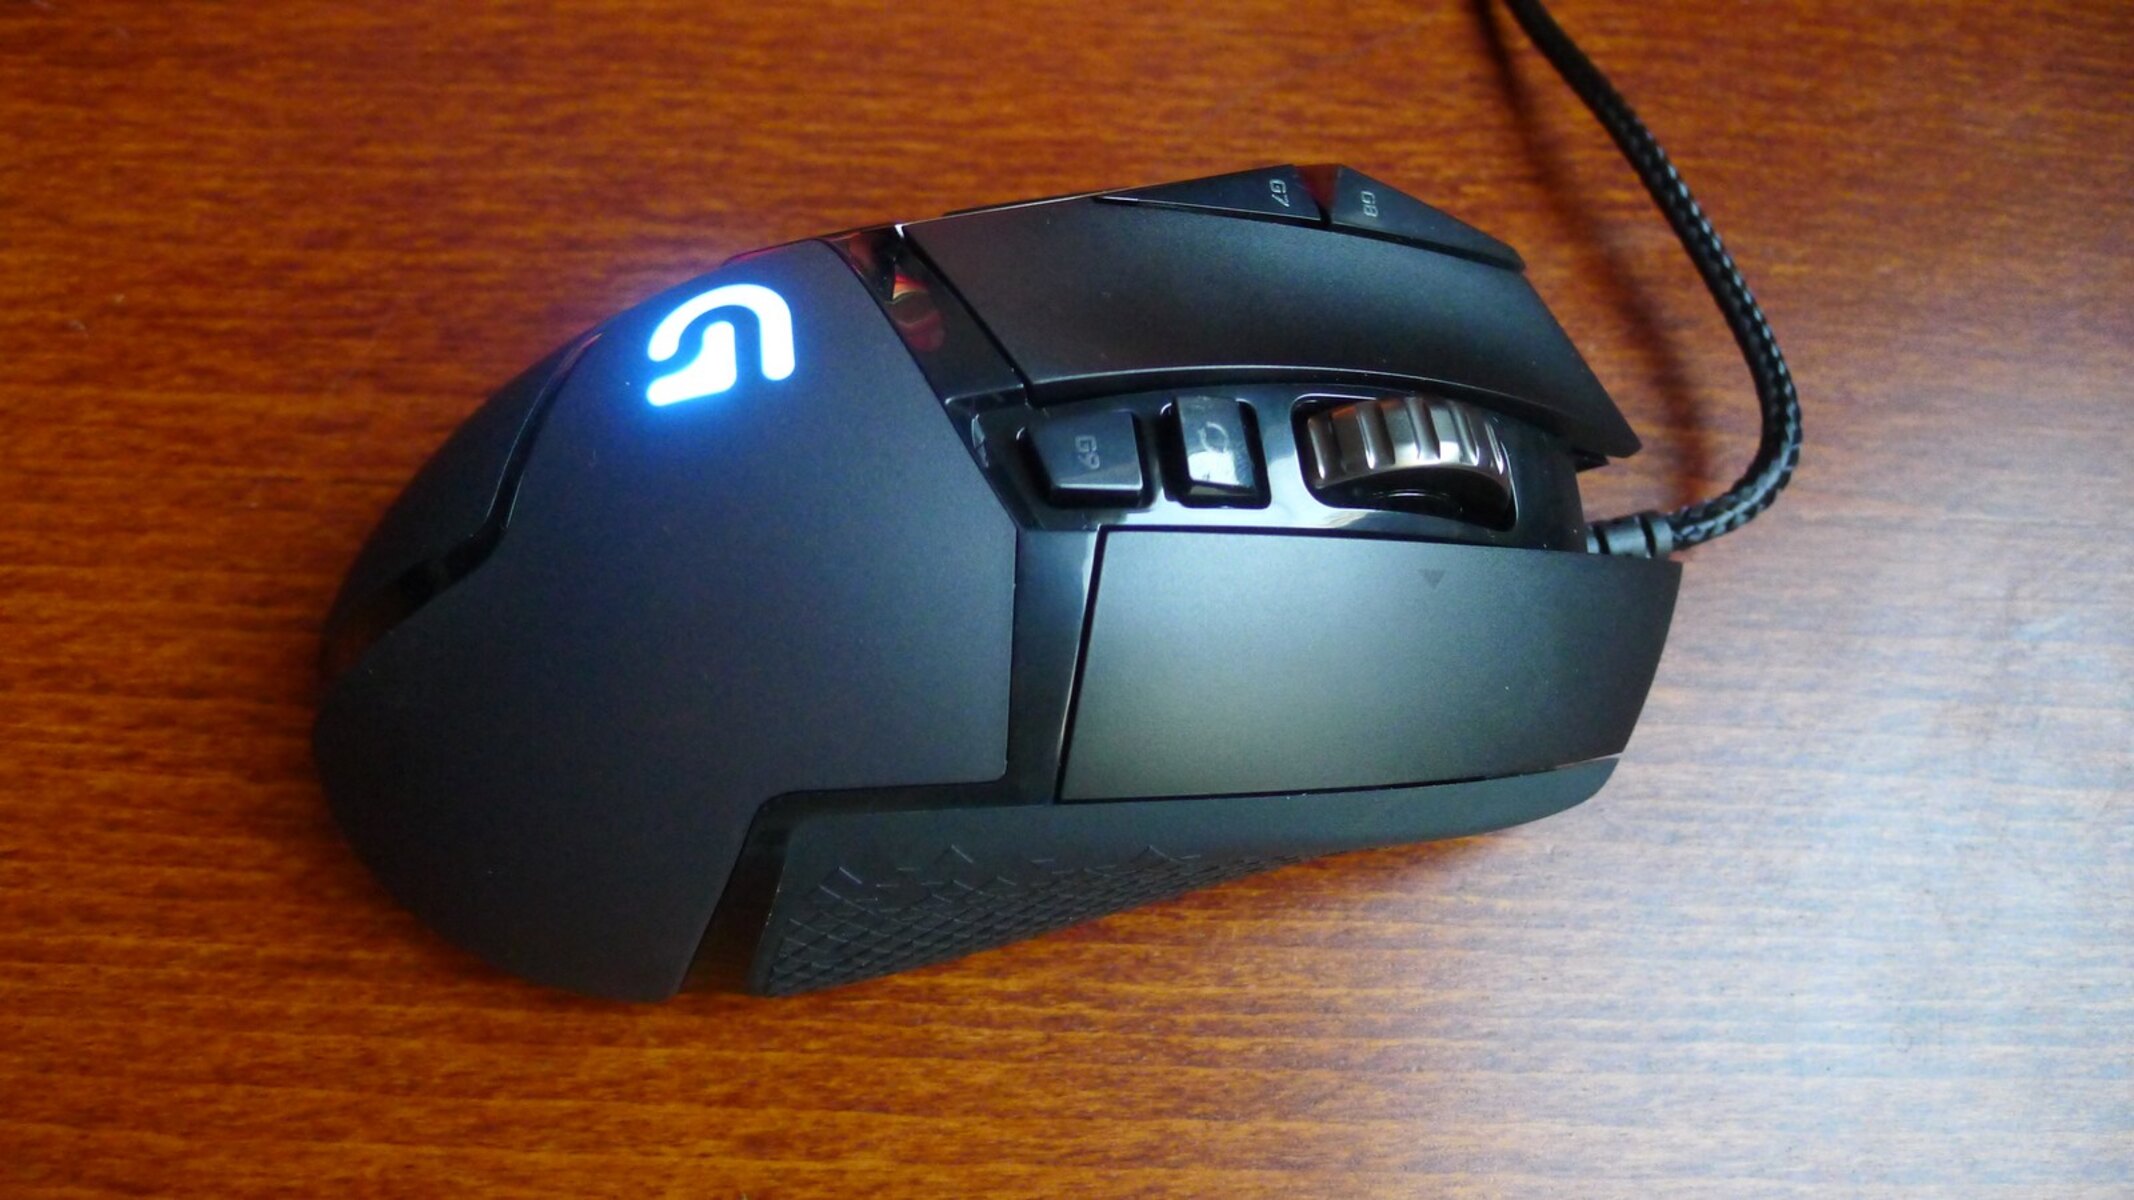 How To Change Configuration On Senlleo Gaming Mouse